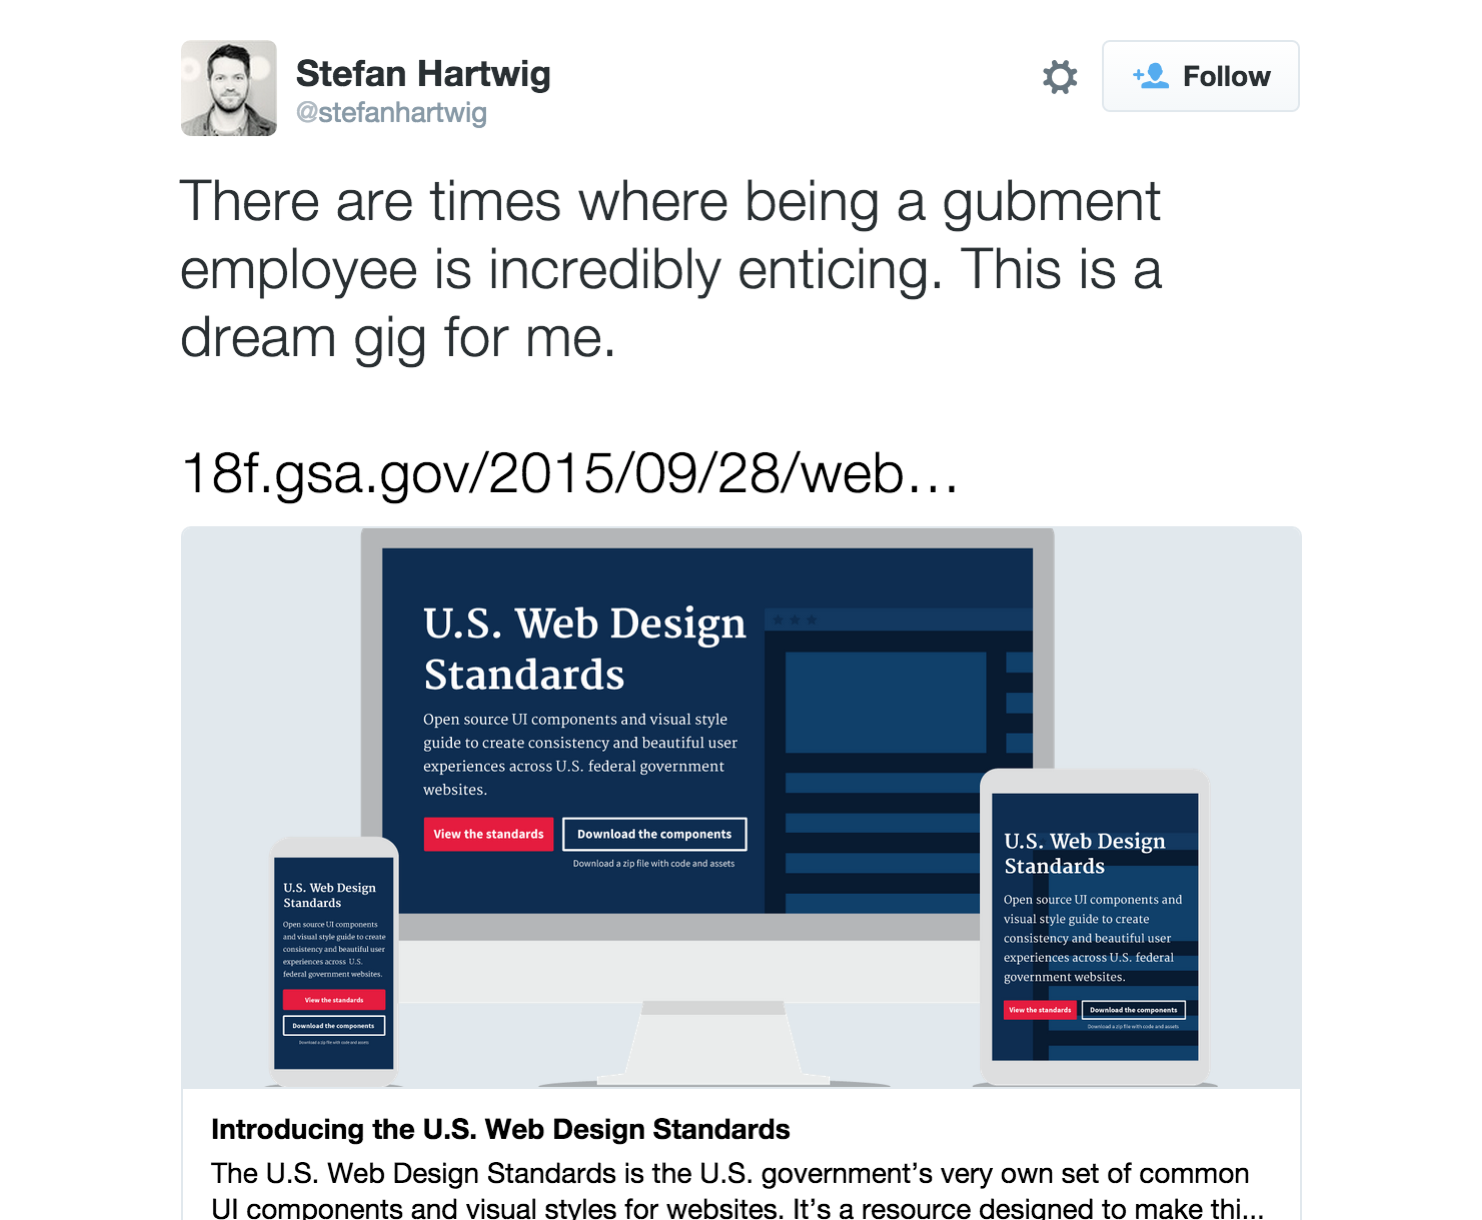 A tweet from @stefanhartwig saying 'There are times when being a gubment employee is incredibly enticing. This is a dream gig for me' and linking to a blog post about the web design standards 